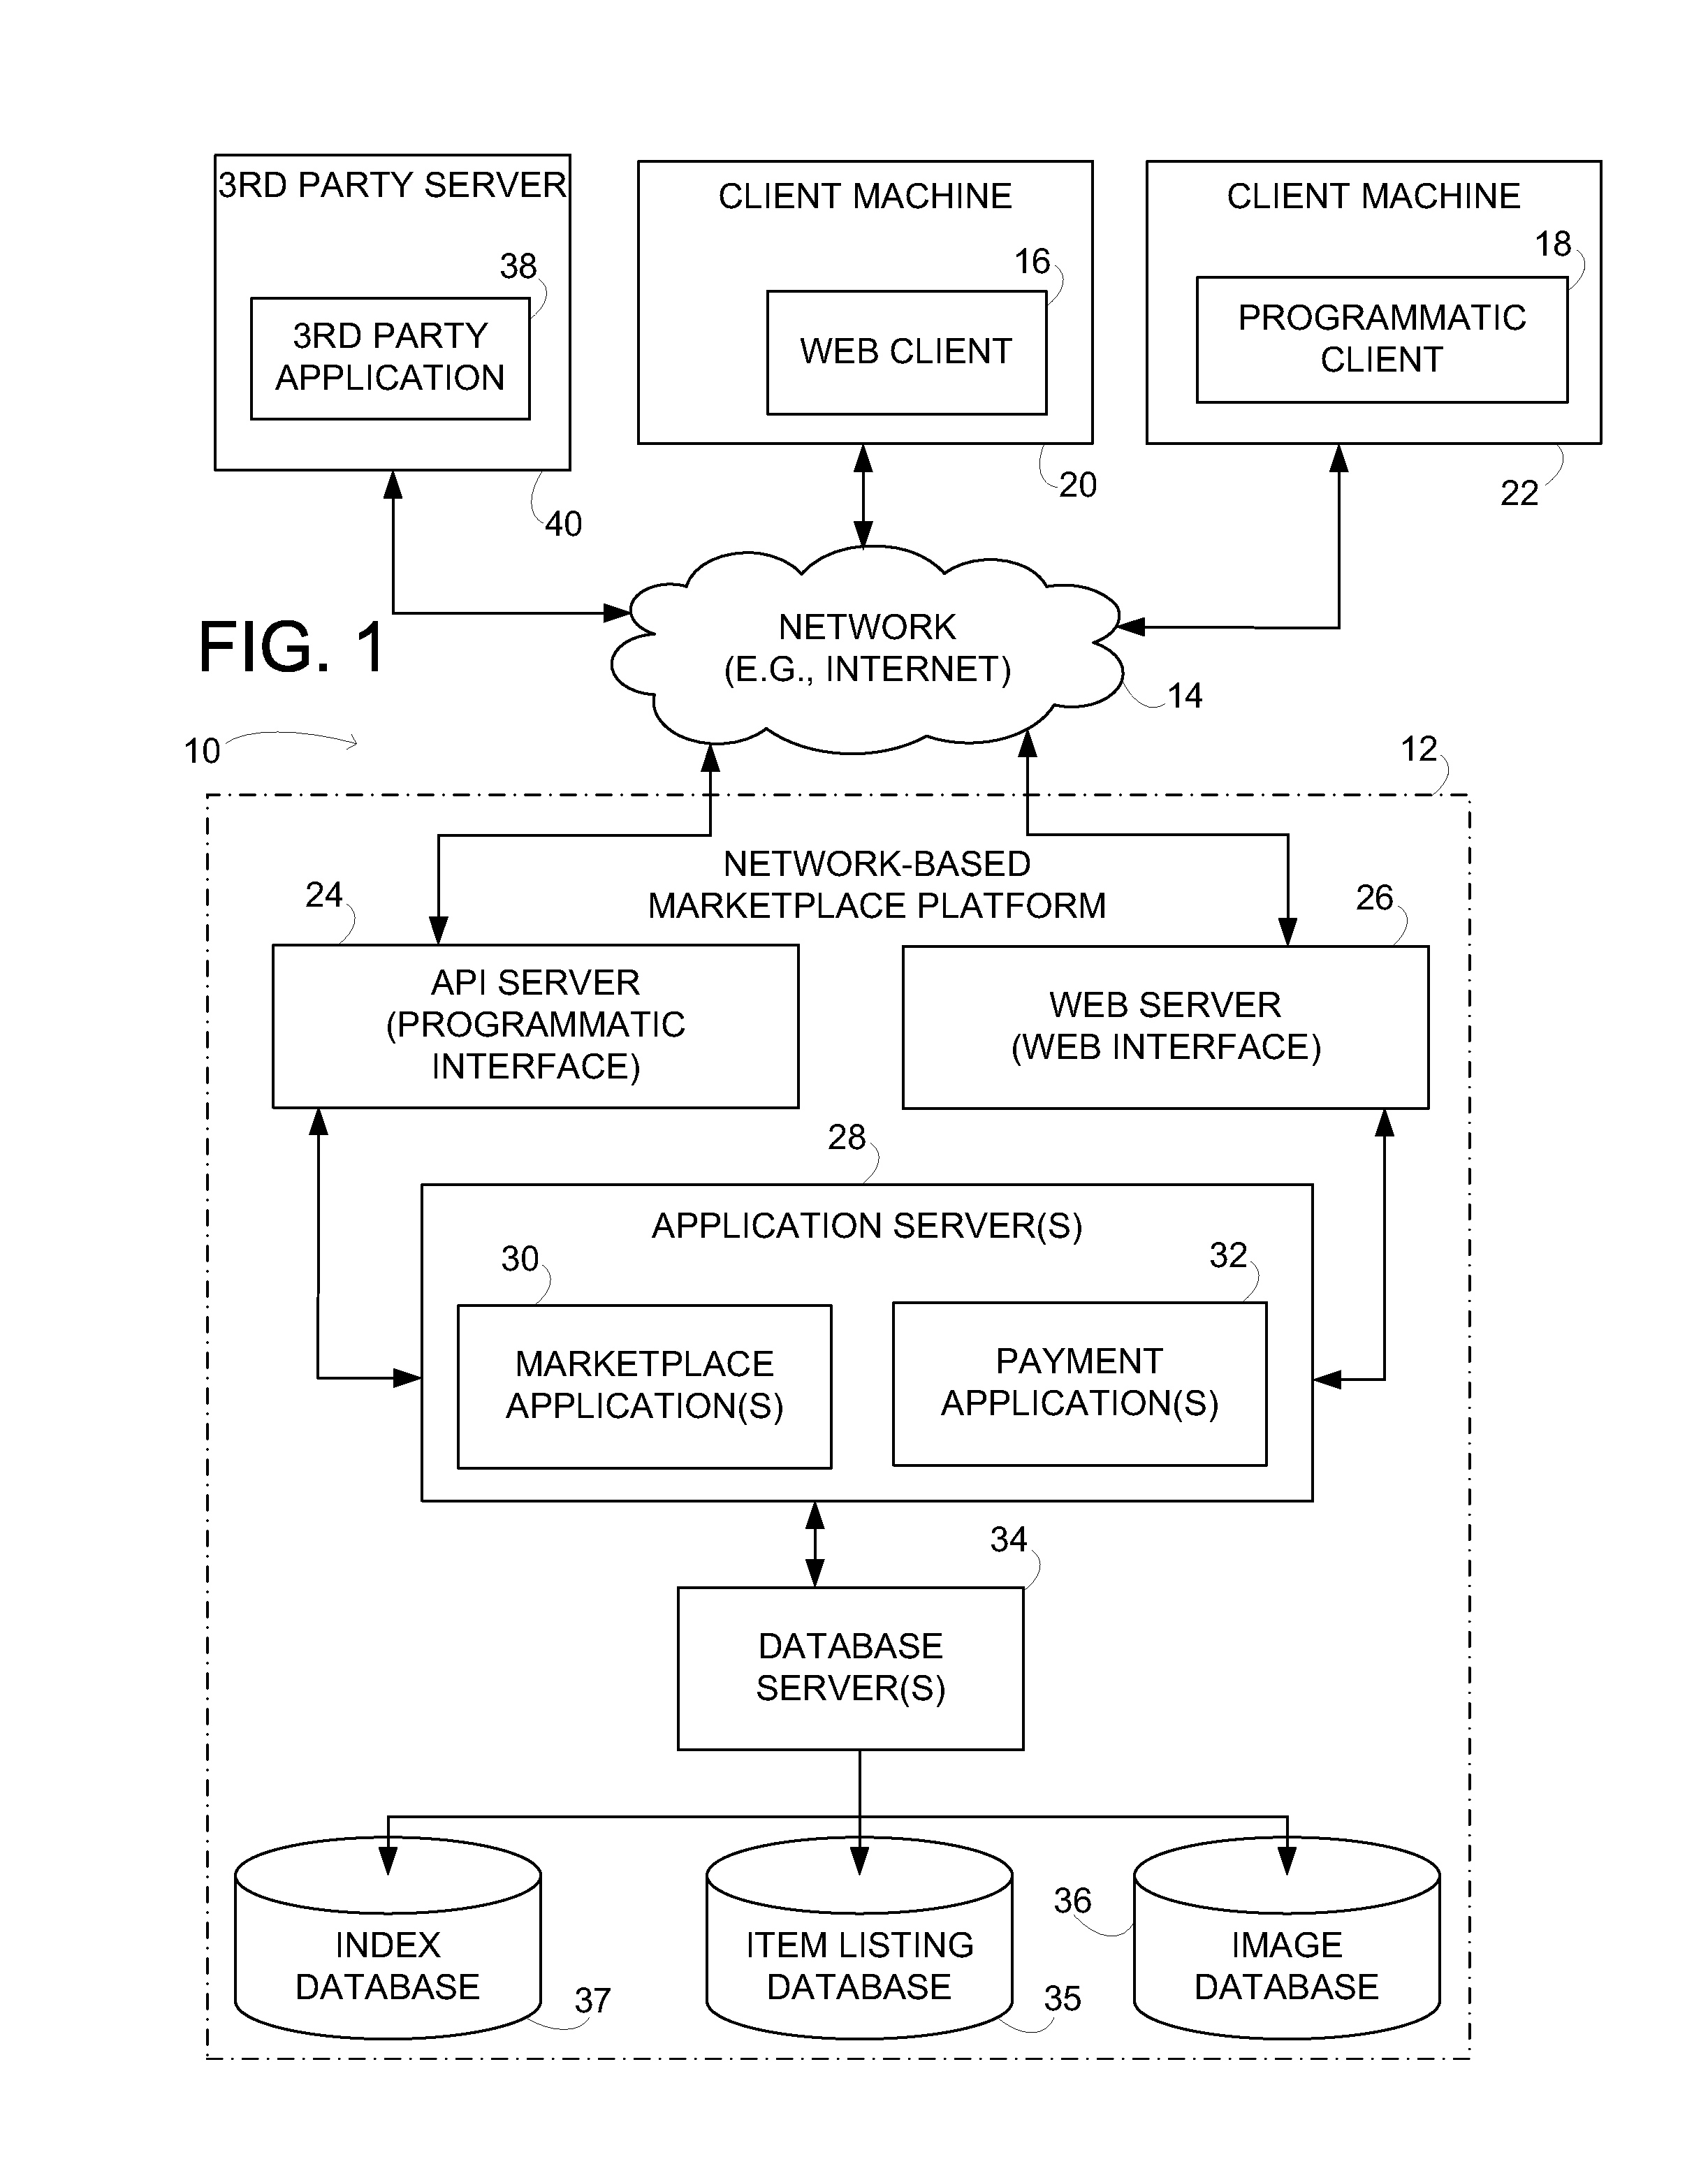 Enhancing the search experience in a networked publication system by improved search and listing process